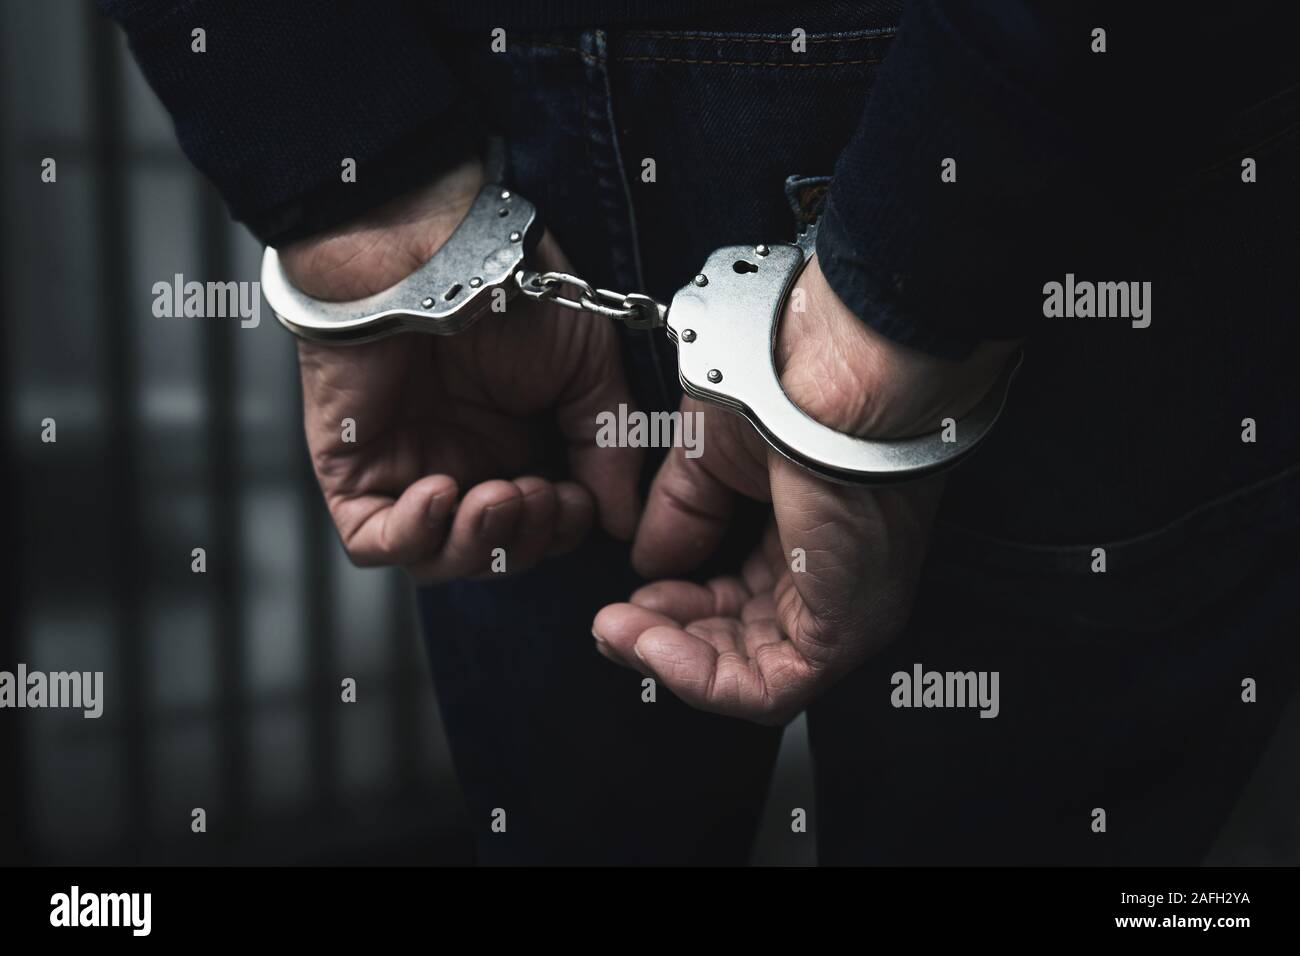 arrested man with cuffed hands behind prison bars Stock Photo